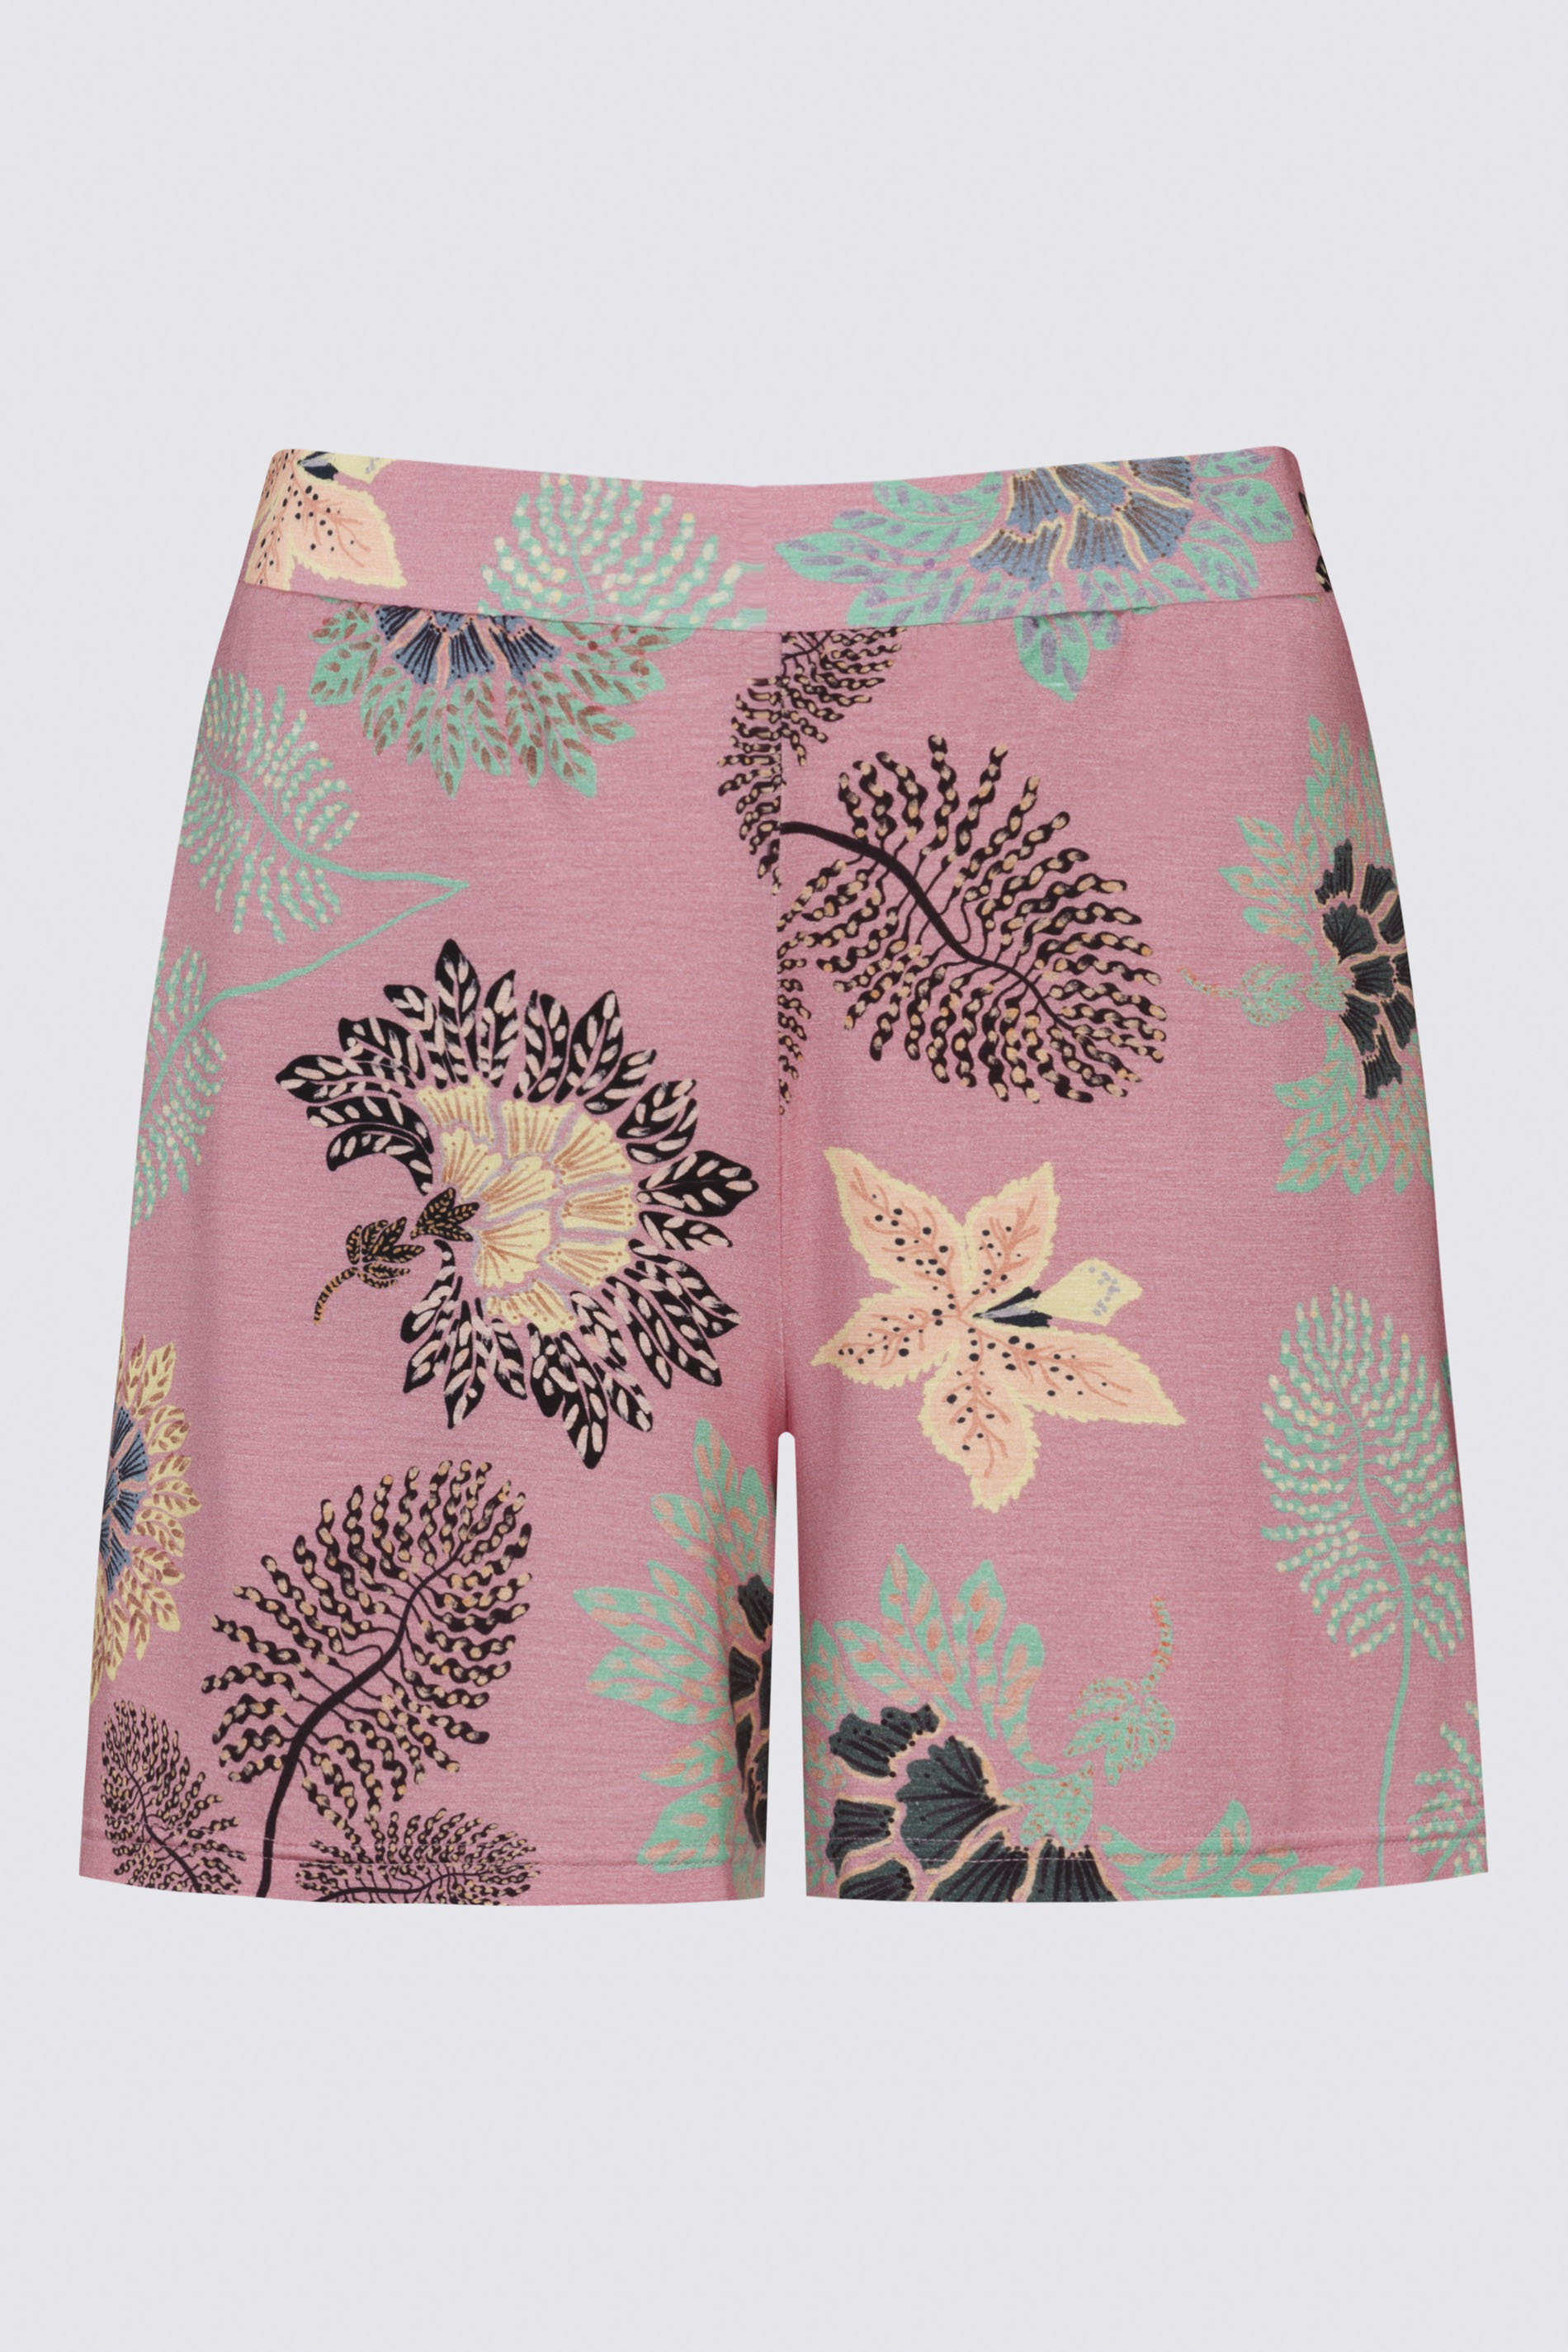 Shorts Serie Alaina Uitknippen | mey®